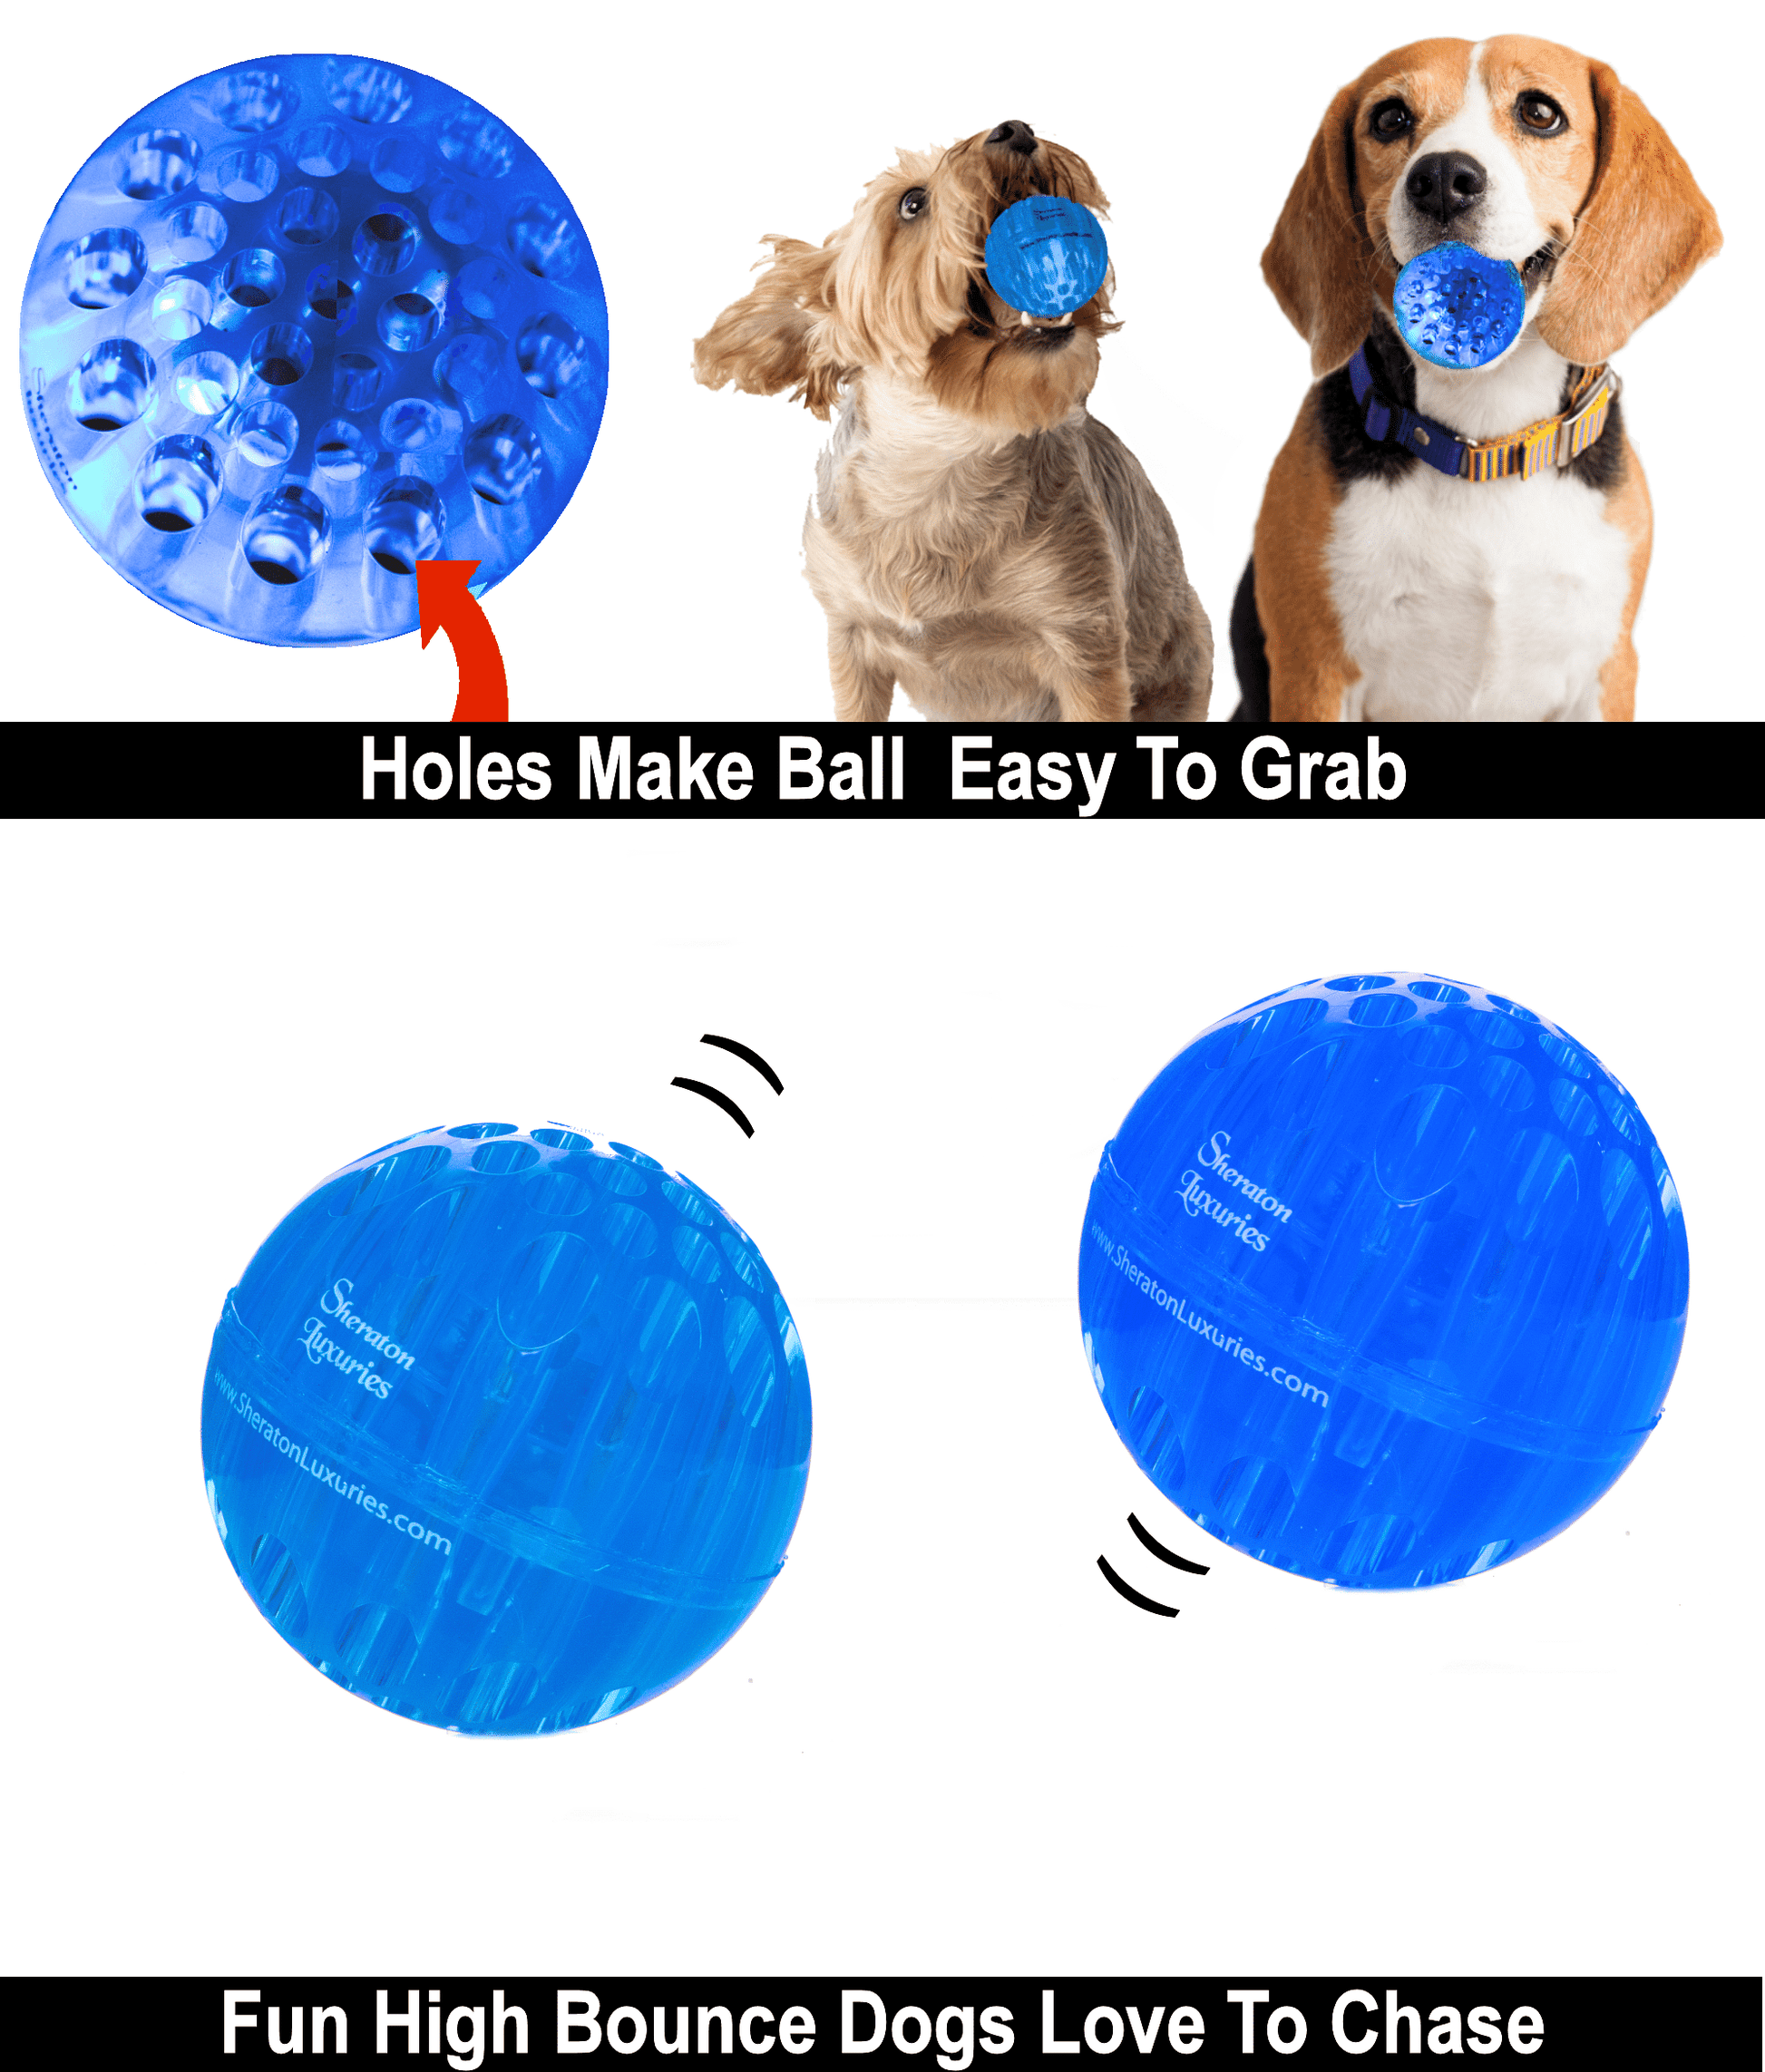 Dog Lick Mat Durable Dog Toys Best Dog Toys Toys for Dogs Dog Owner Gifts 